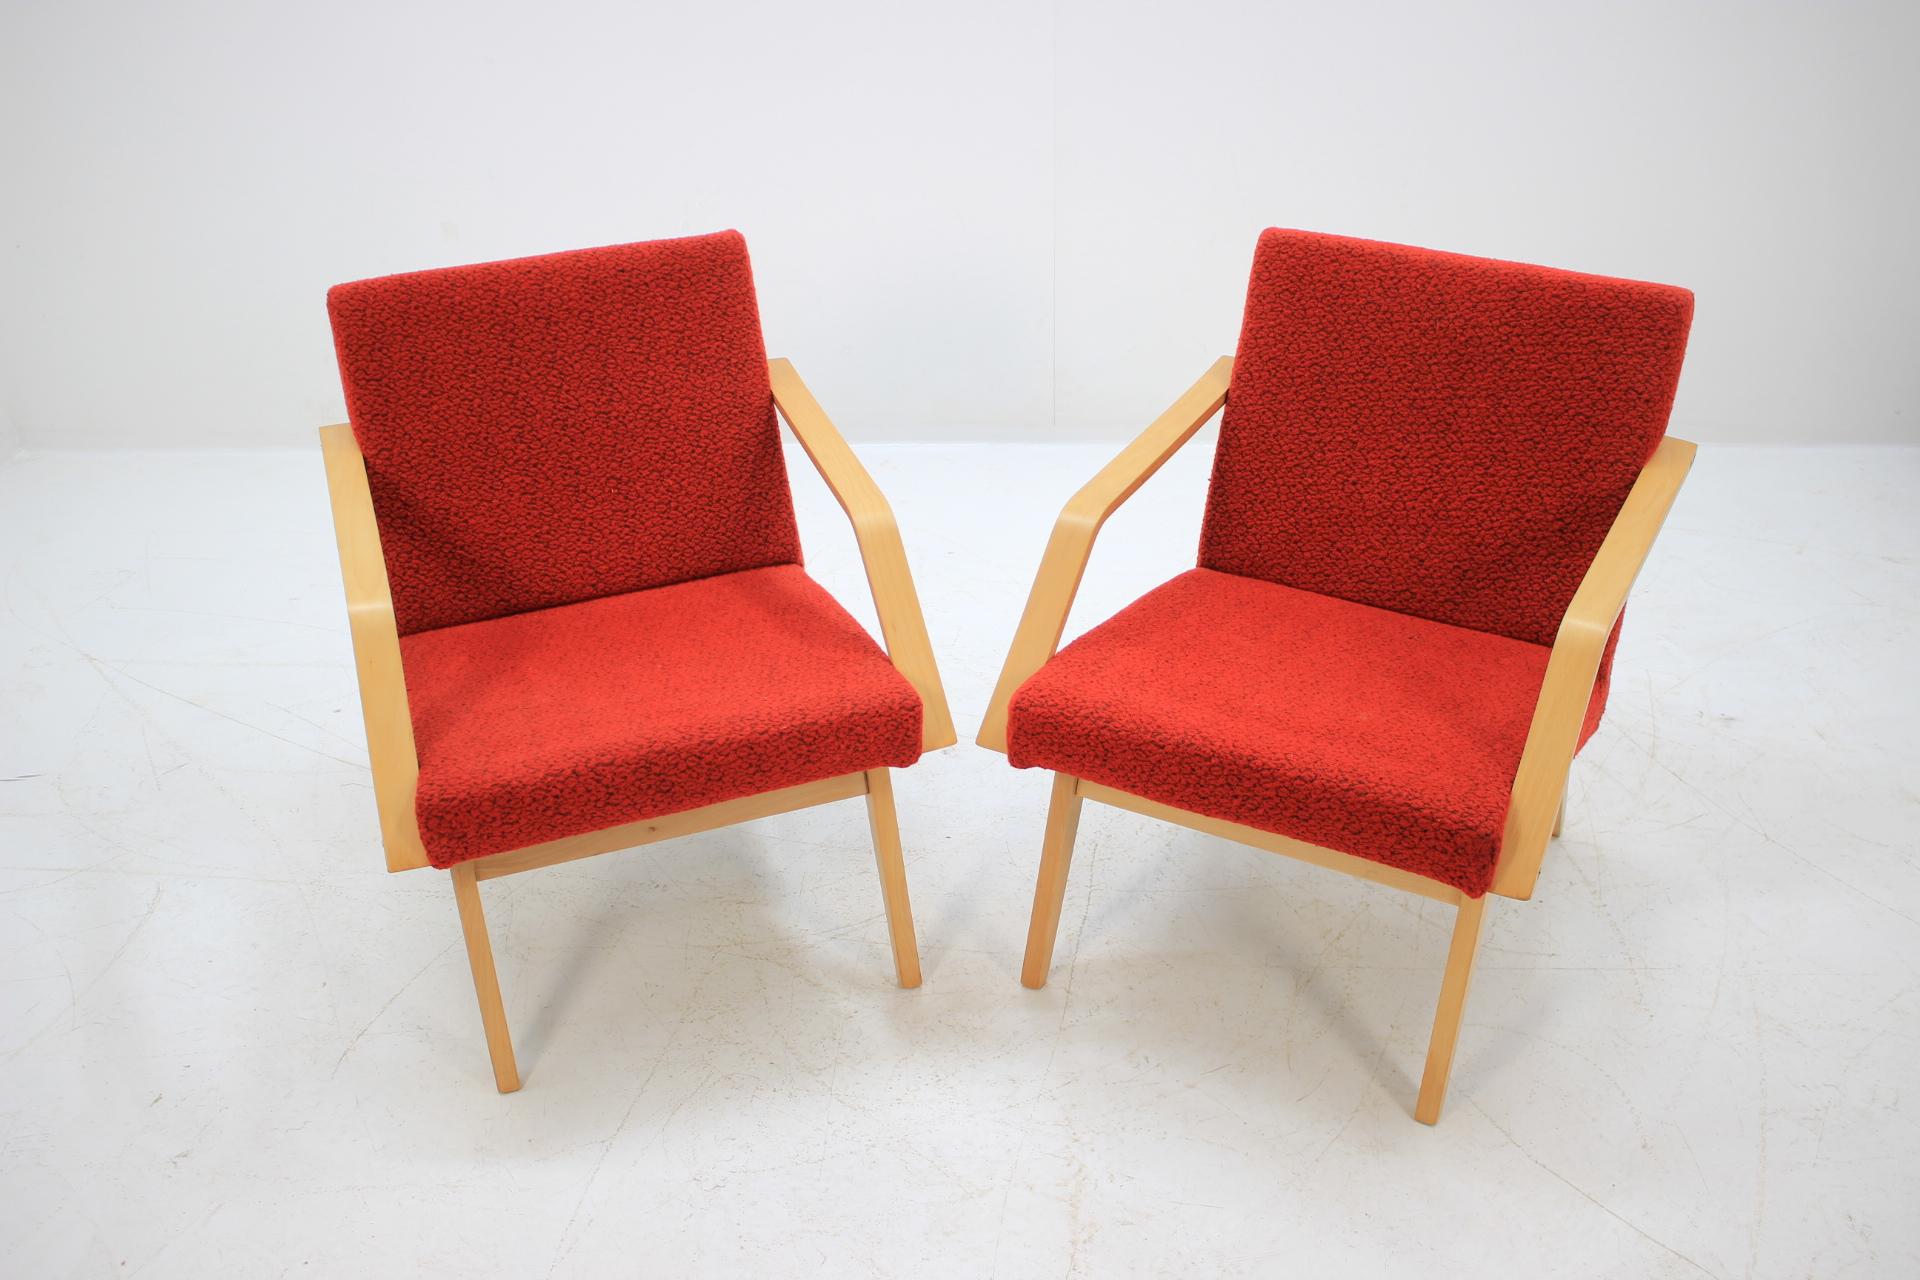 - Made in Czechoslovakia
- Made of bentwood
- Original upholstery
- Original, good condition.